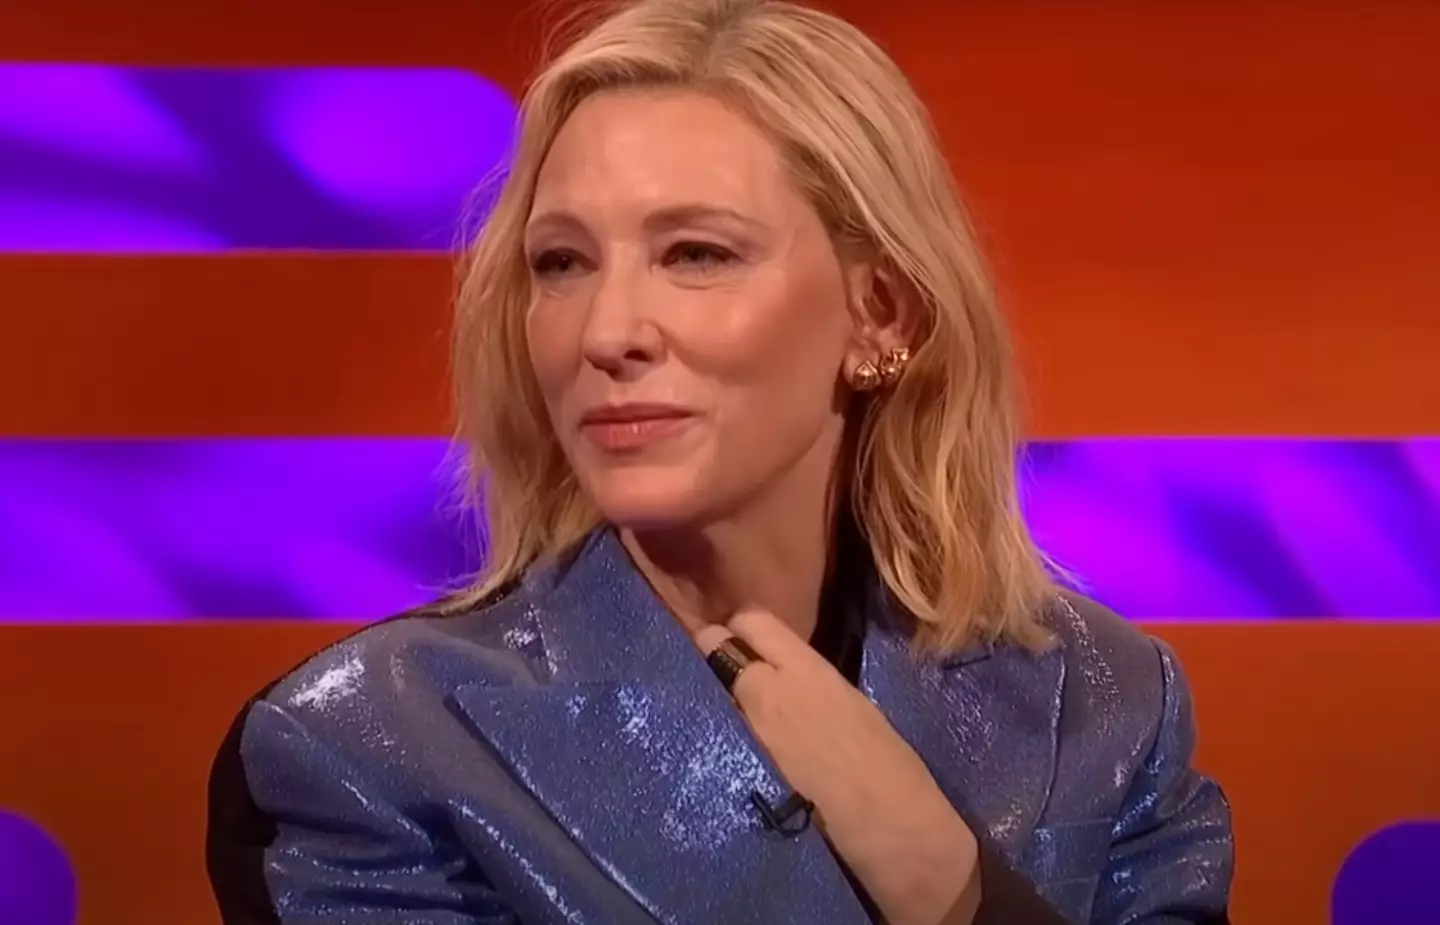 Cate Blanchett made an appearance at Glastonbury.